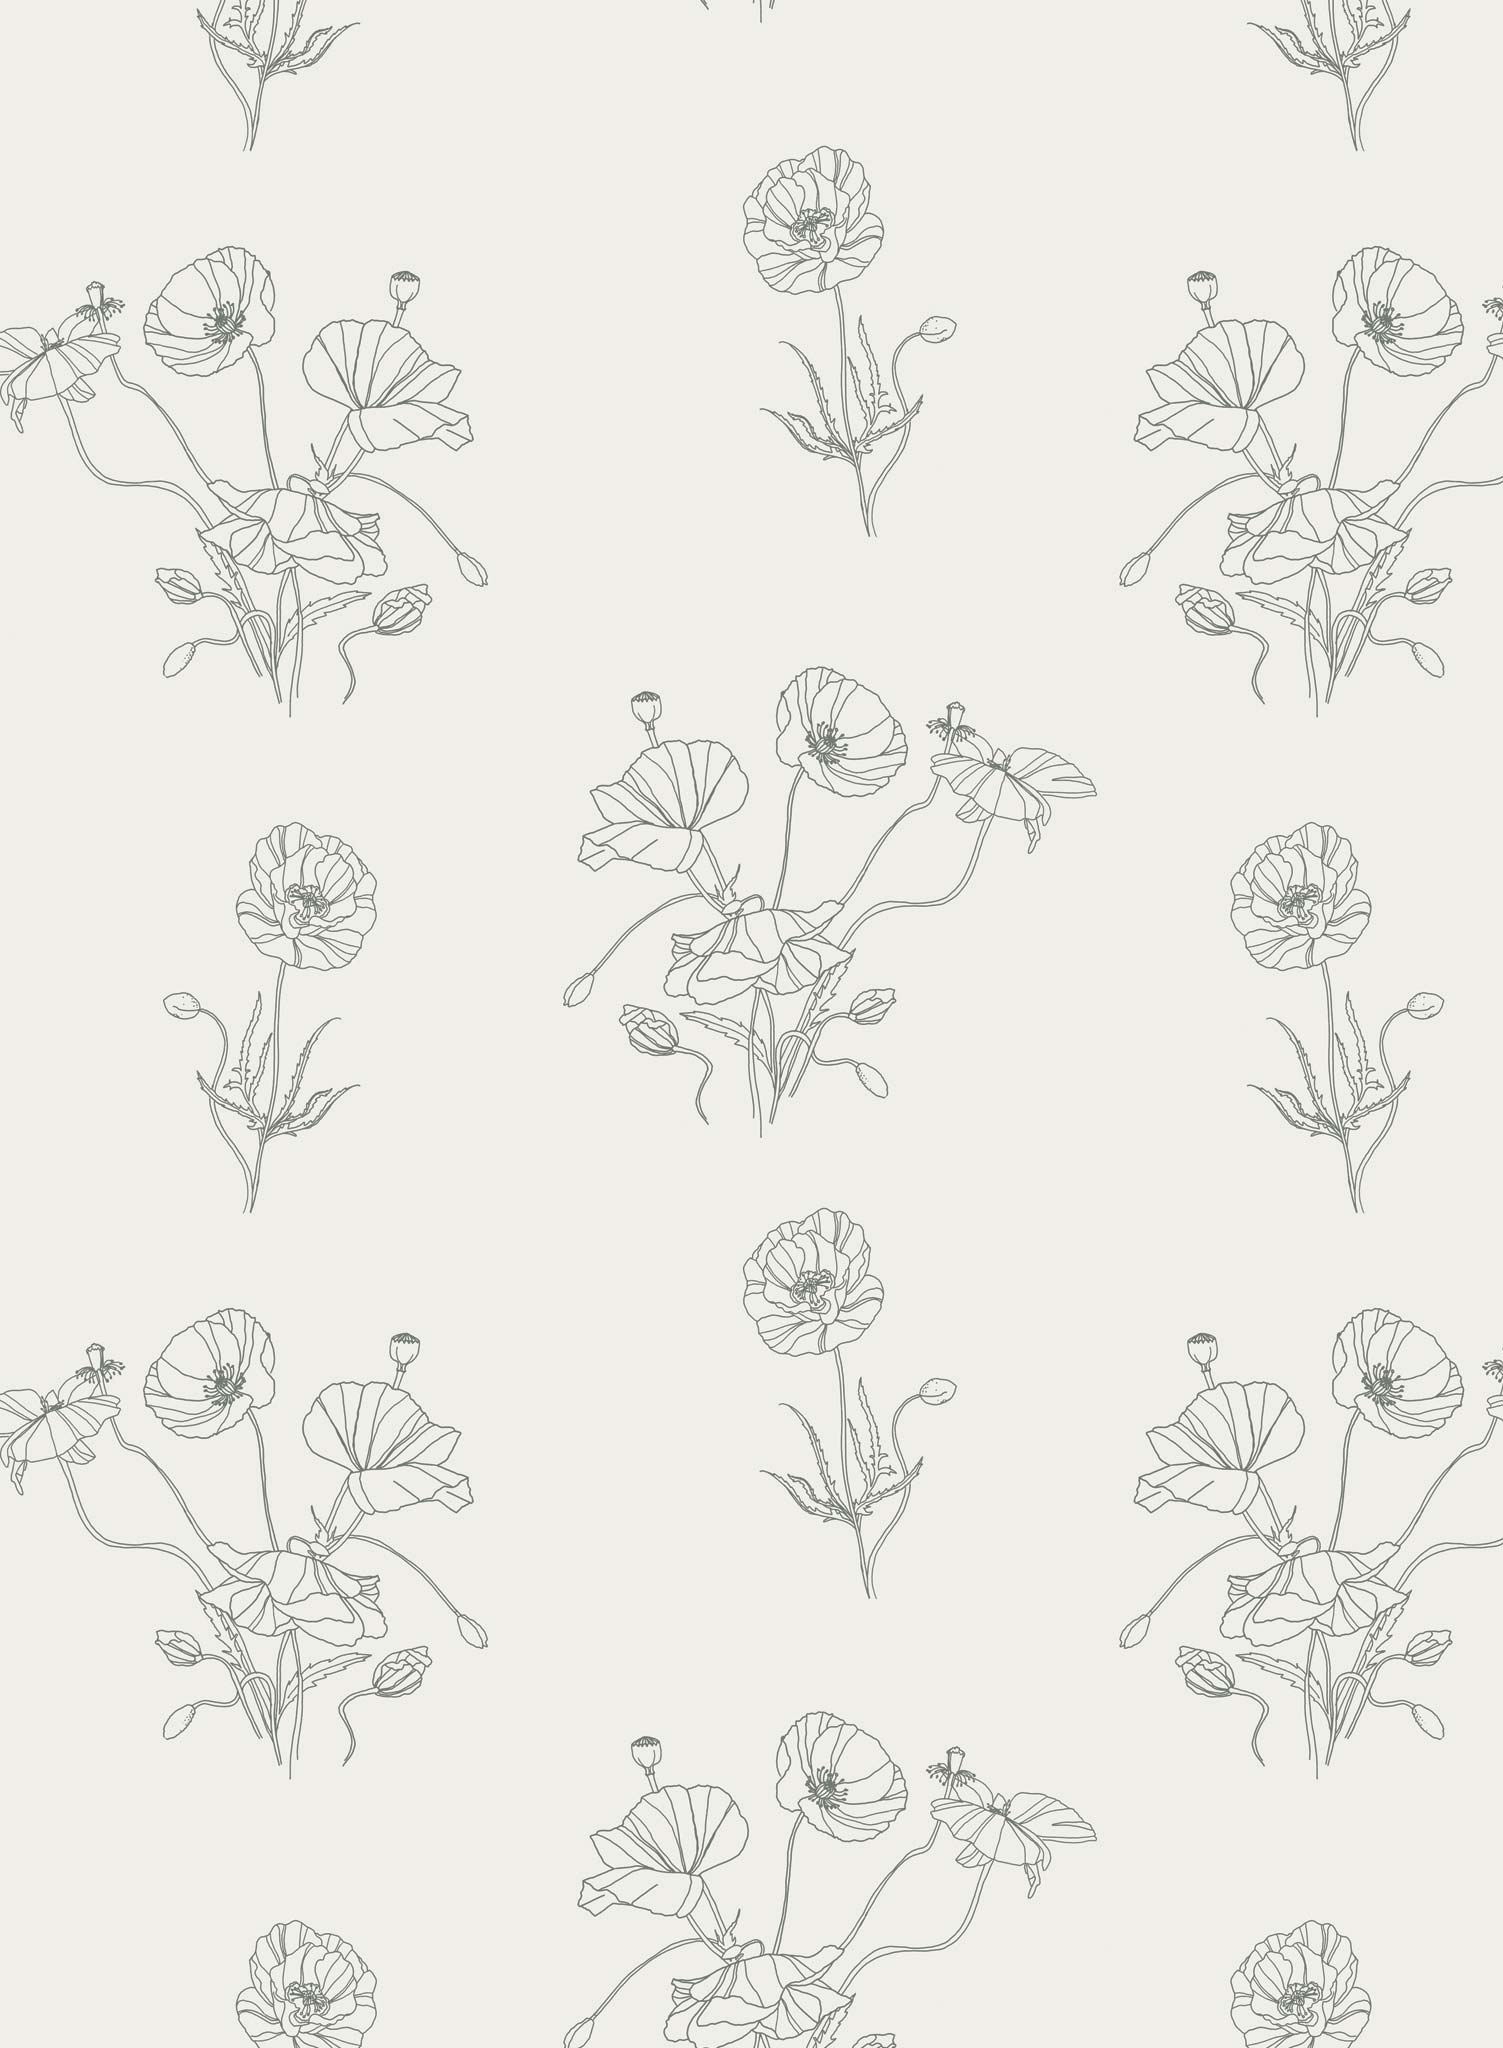 Springfield is a Minimalist wallpaper by Opposite Wall of poppies flowers.